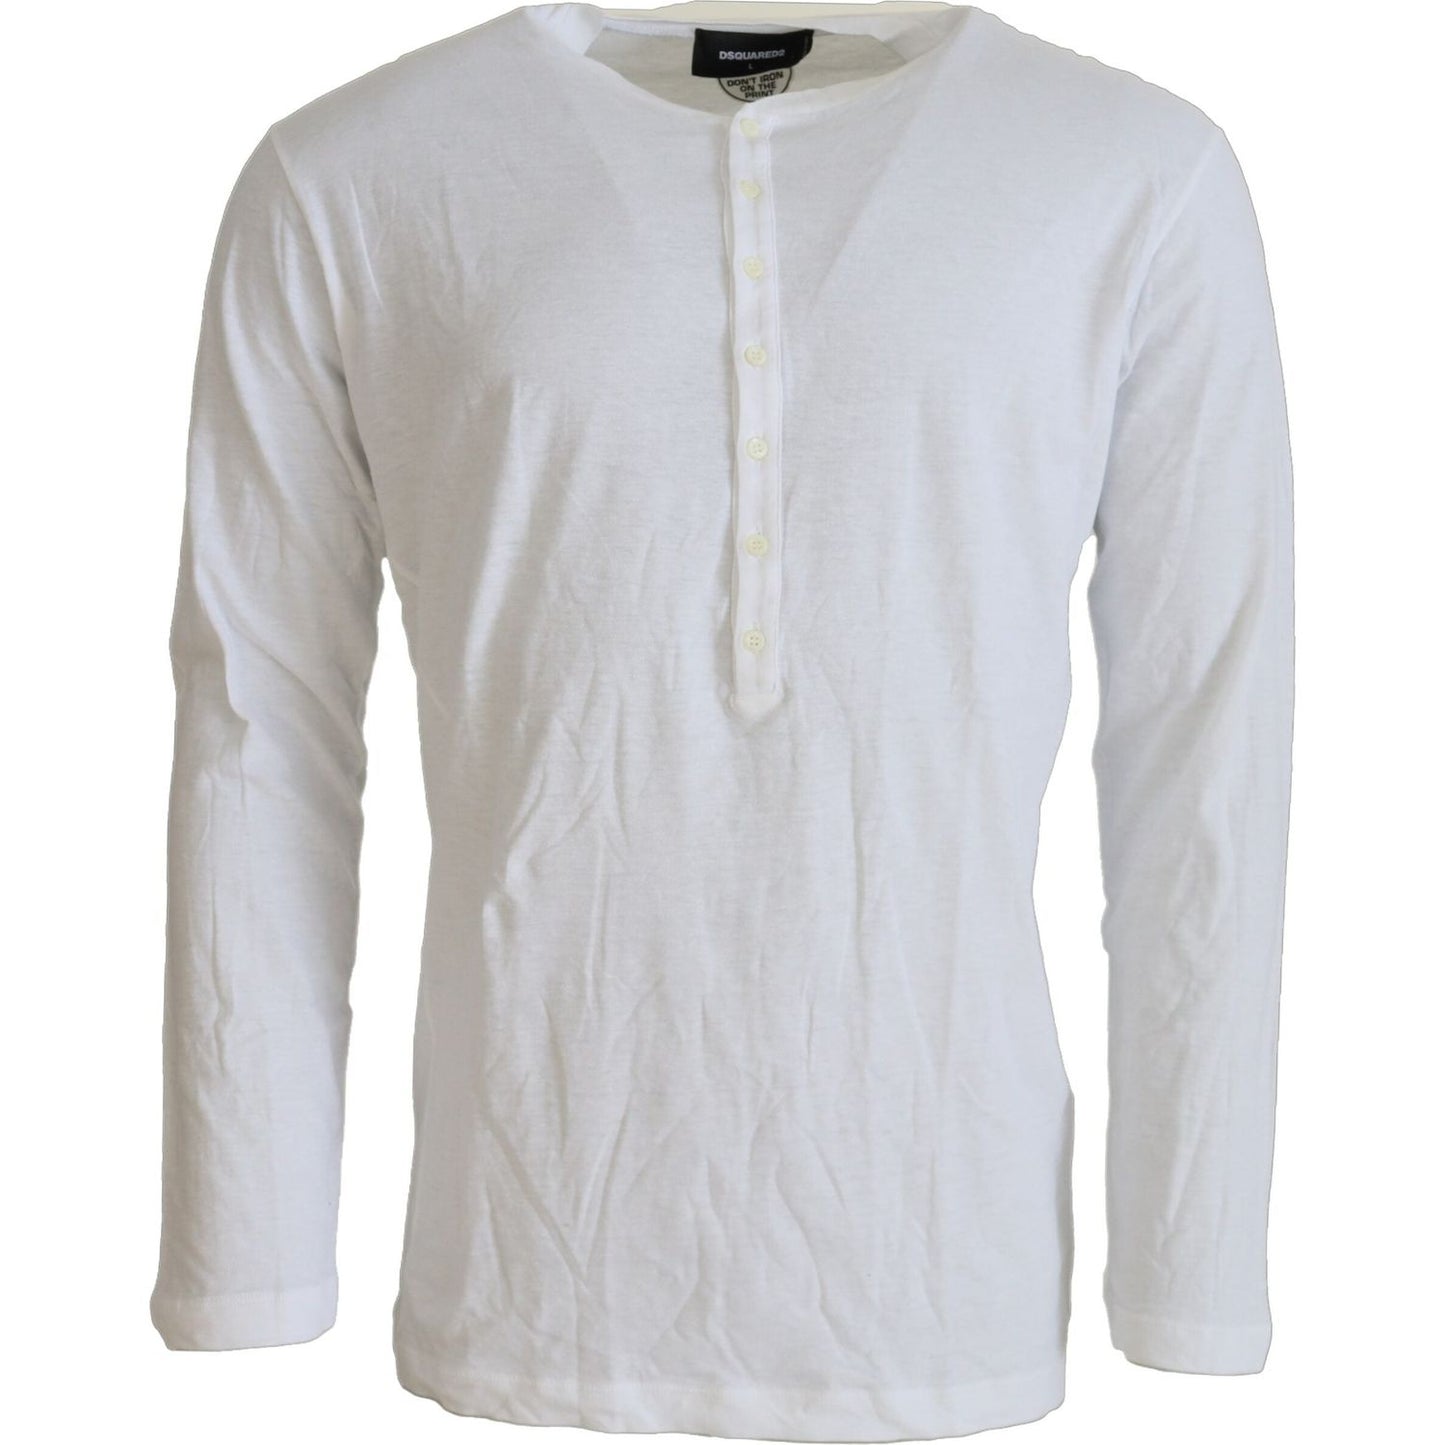 Dsquared² White Cotton Linen Long Sleeves Pullover Sweater white-cotton-linen-long-sleeves-pullover-sweater